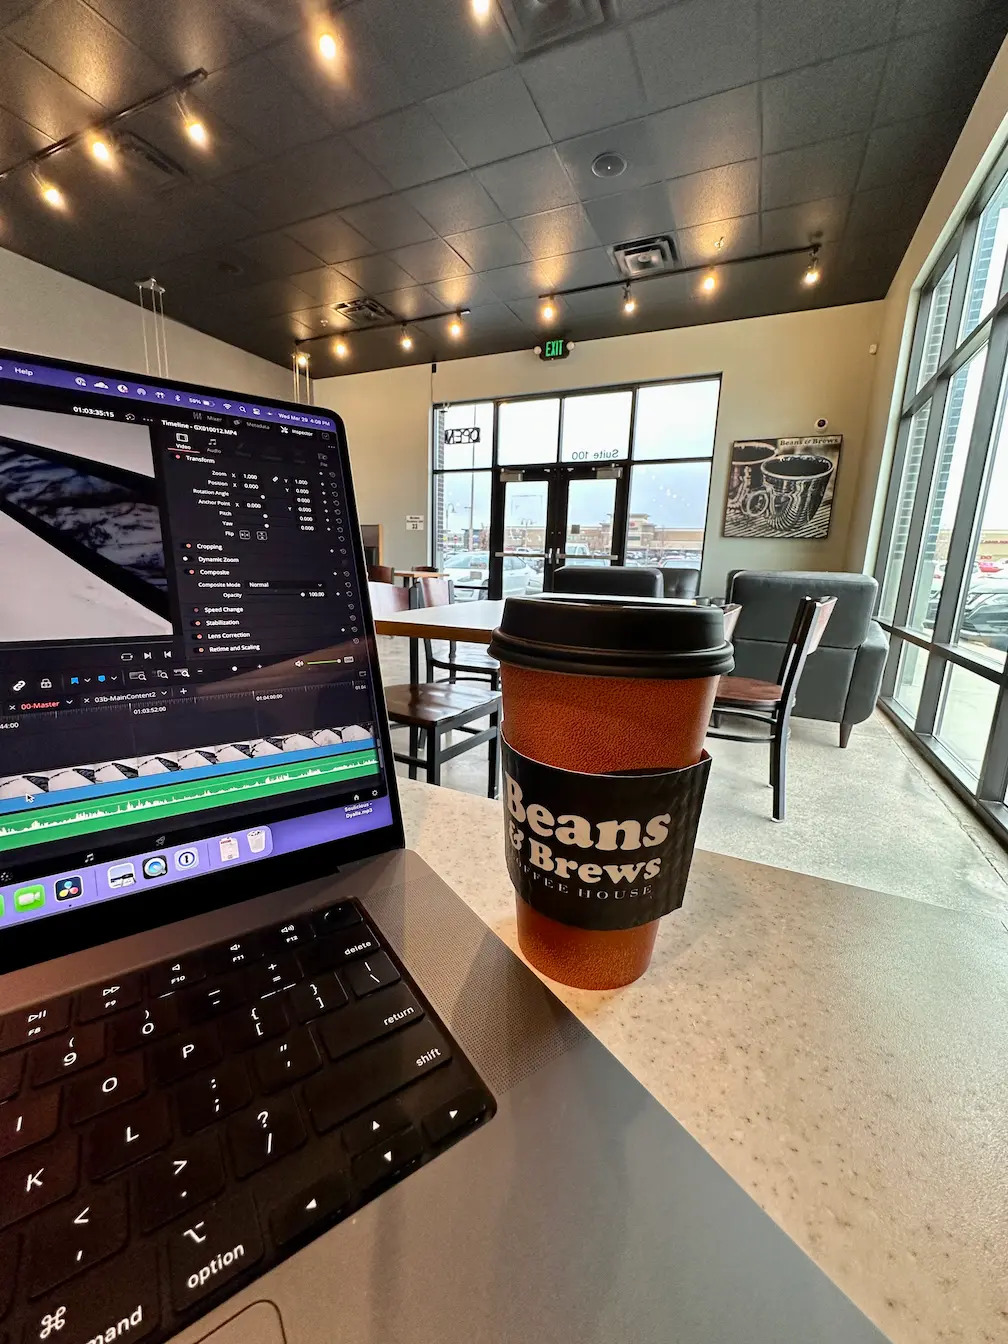 Lindsey is editing a ski video at a local Beans and Brews coffee shop.